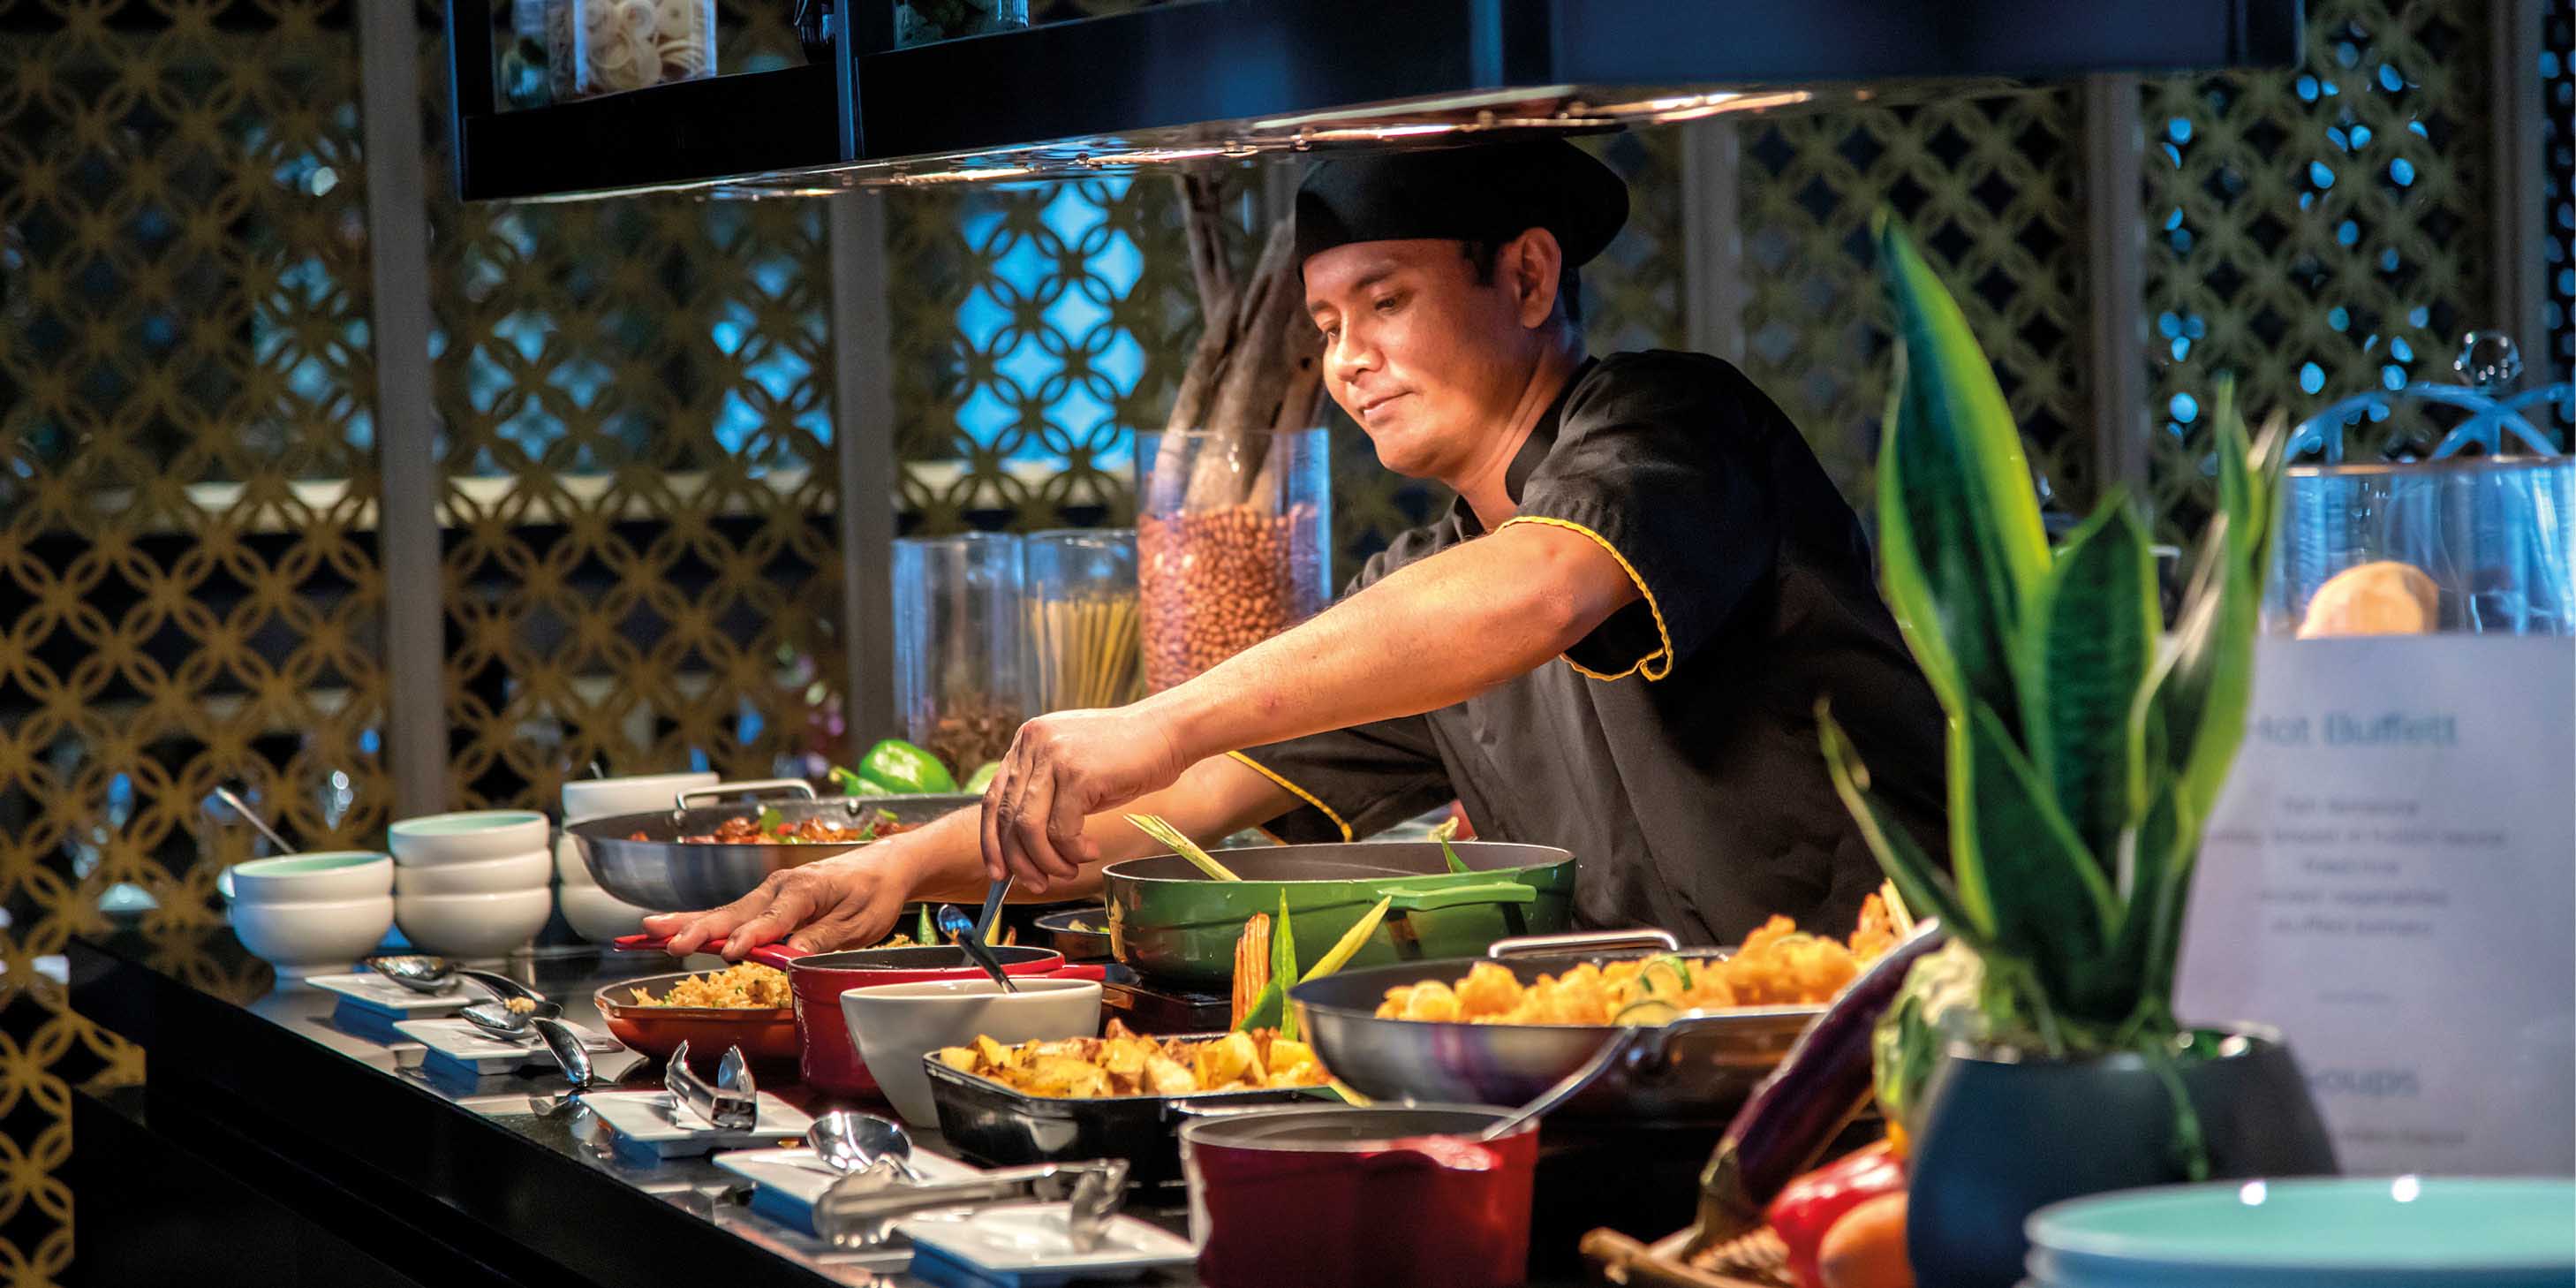 Chef serving up delicious Asian inspired food on board a luxury river ship in Southeast Asia